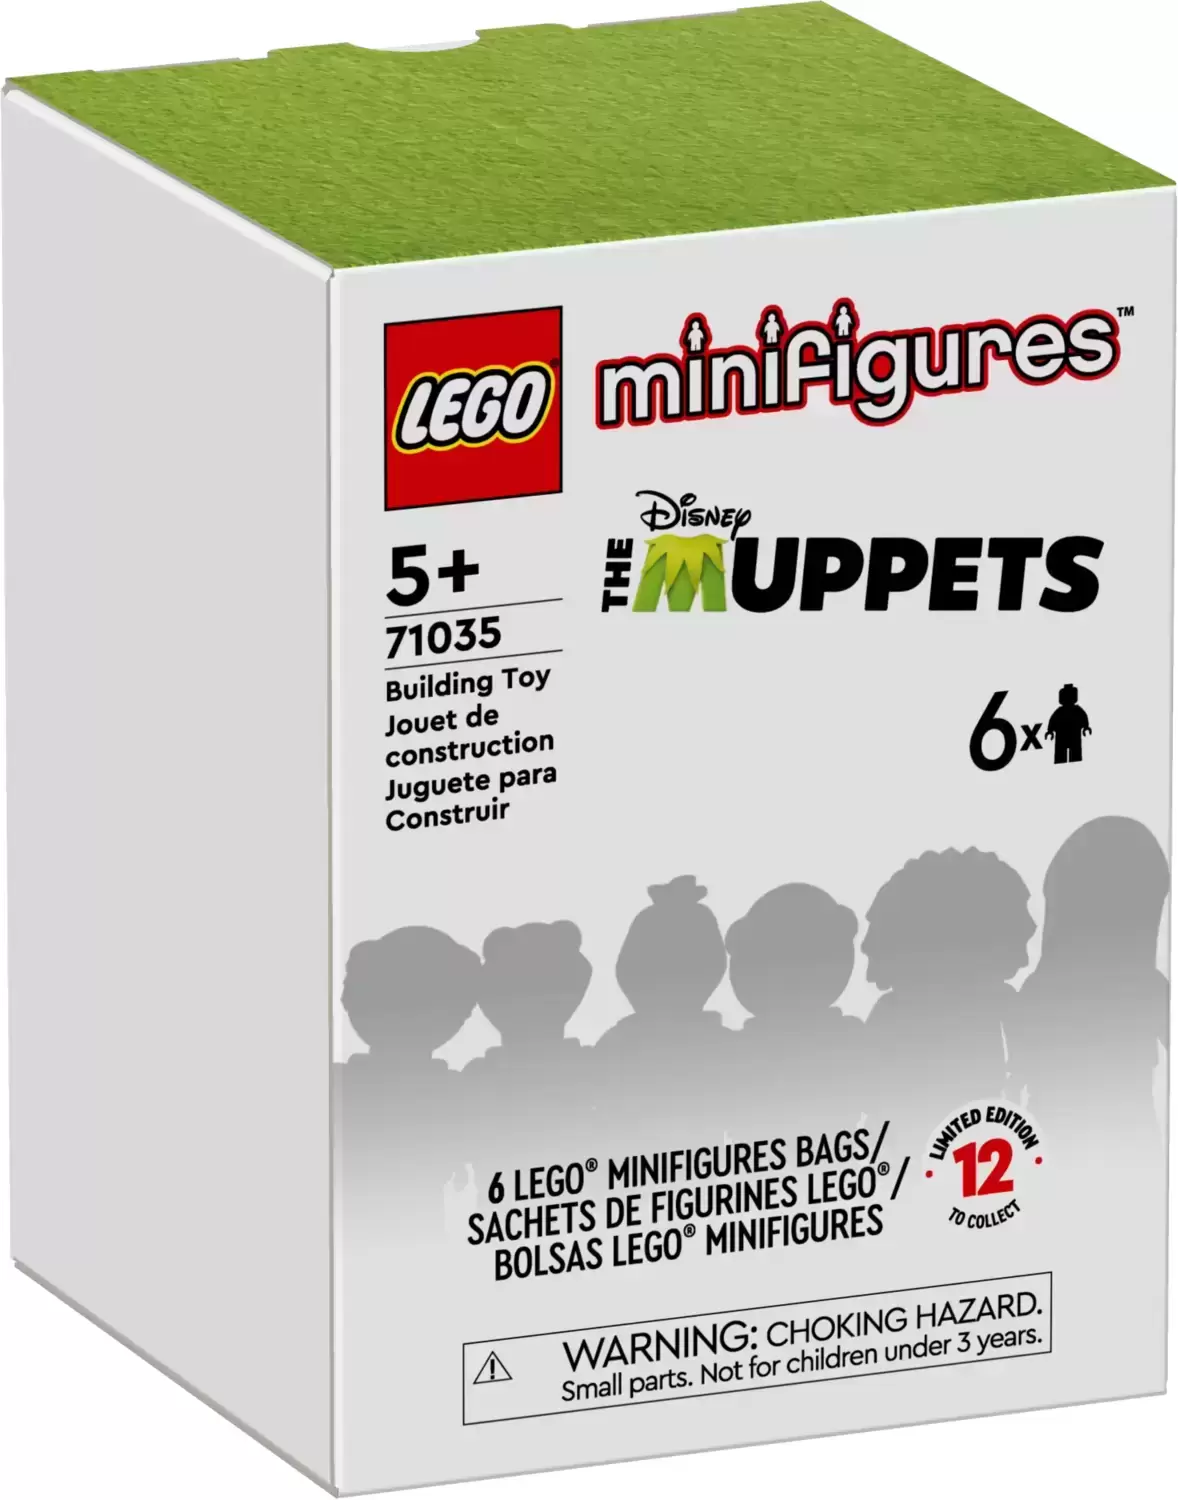 Other LEGO Items - Muppets Minifigures 6-pack